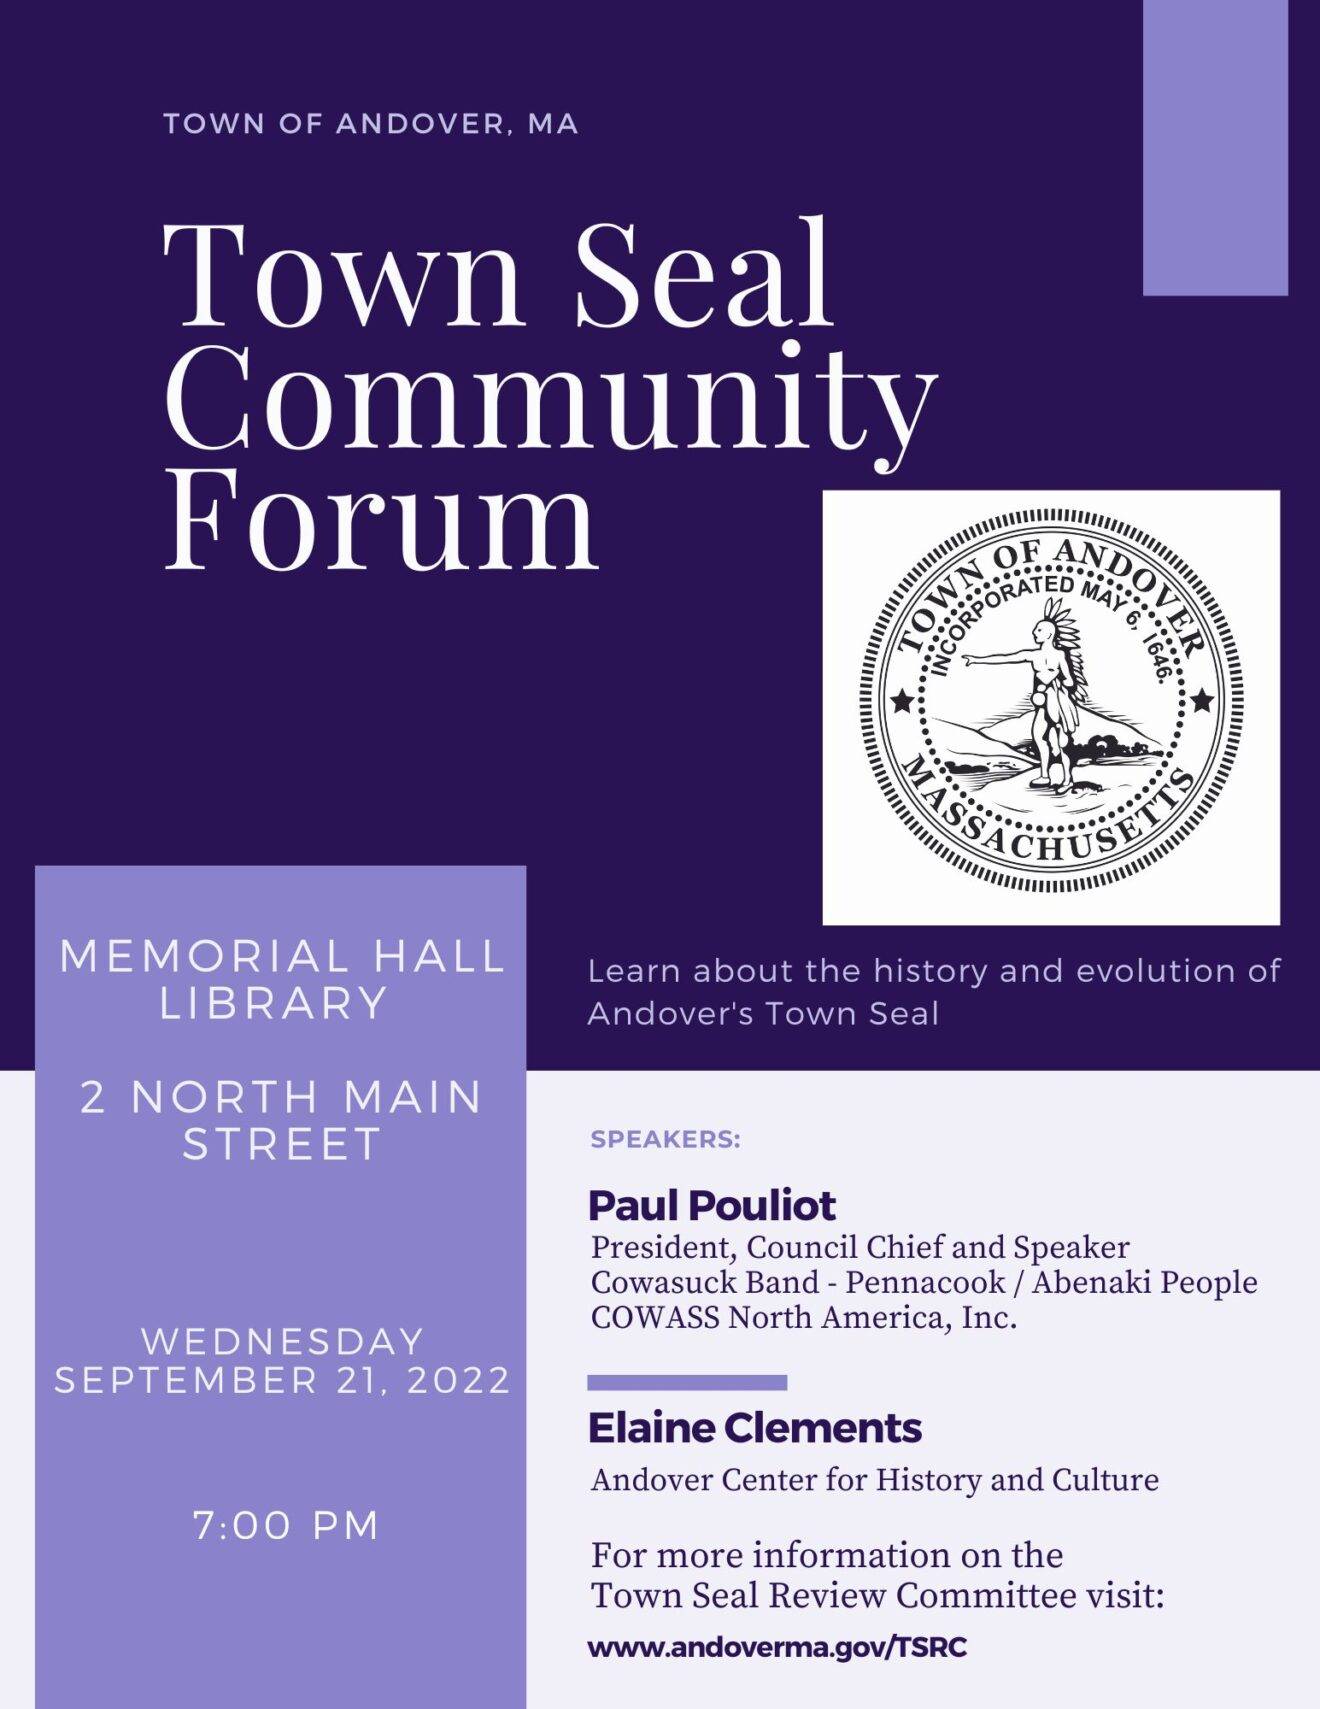 Andover Begins 'Difficult Discussion' On Town Seal